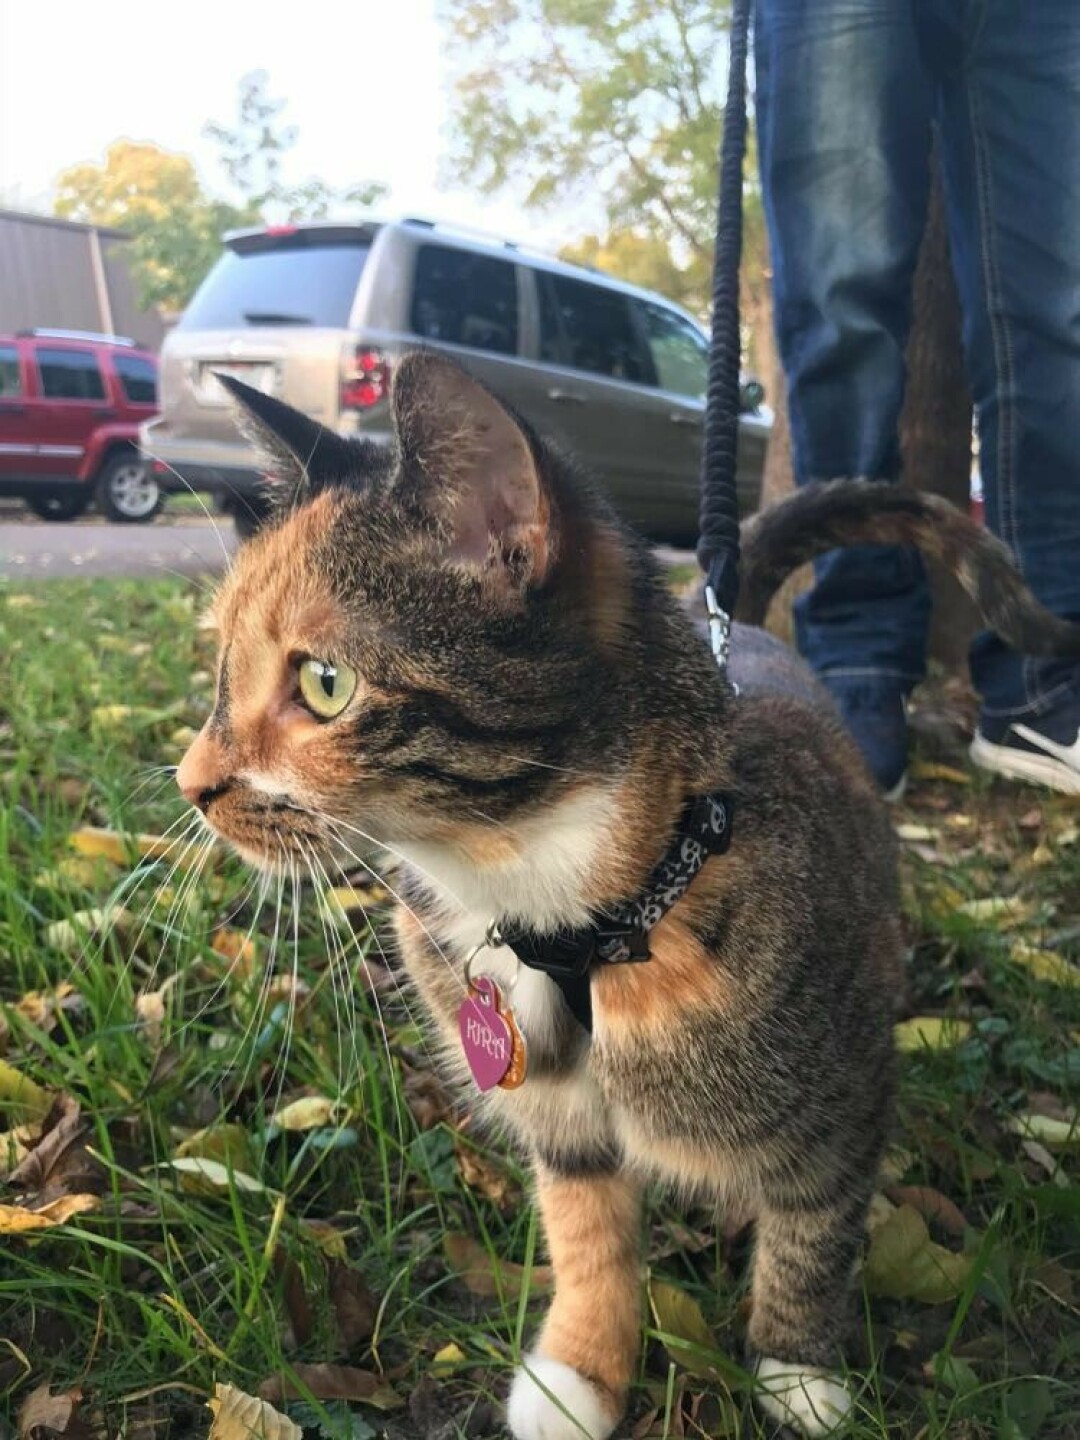 A PURRFECT STROLL. Is it just us, or does it seem like there are more and more cat-walkers ambling about? Turns out, it's a trend that's gaining traction in the Chippewa Valley, as local veterinarians say getting cats outdoors could help with their health.